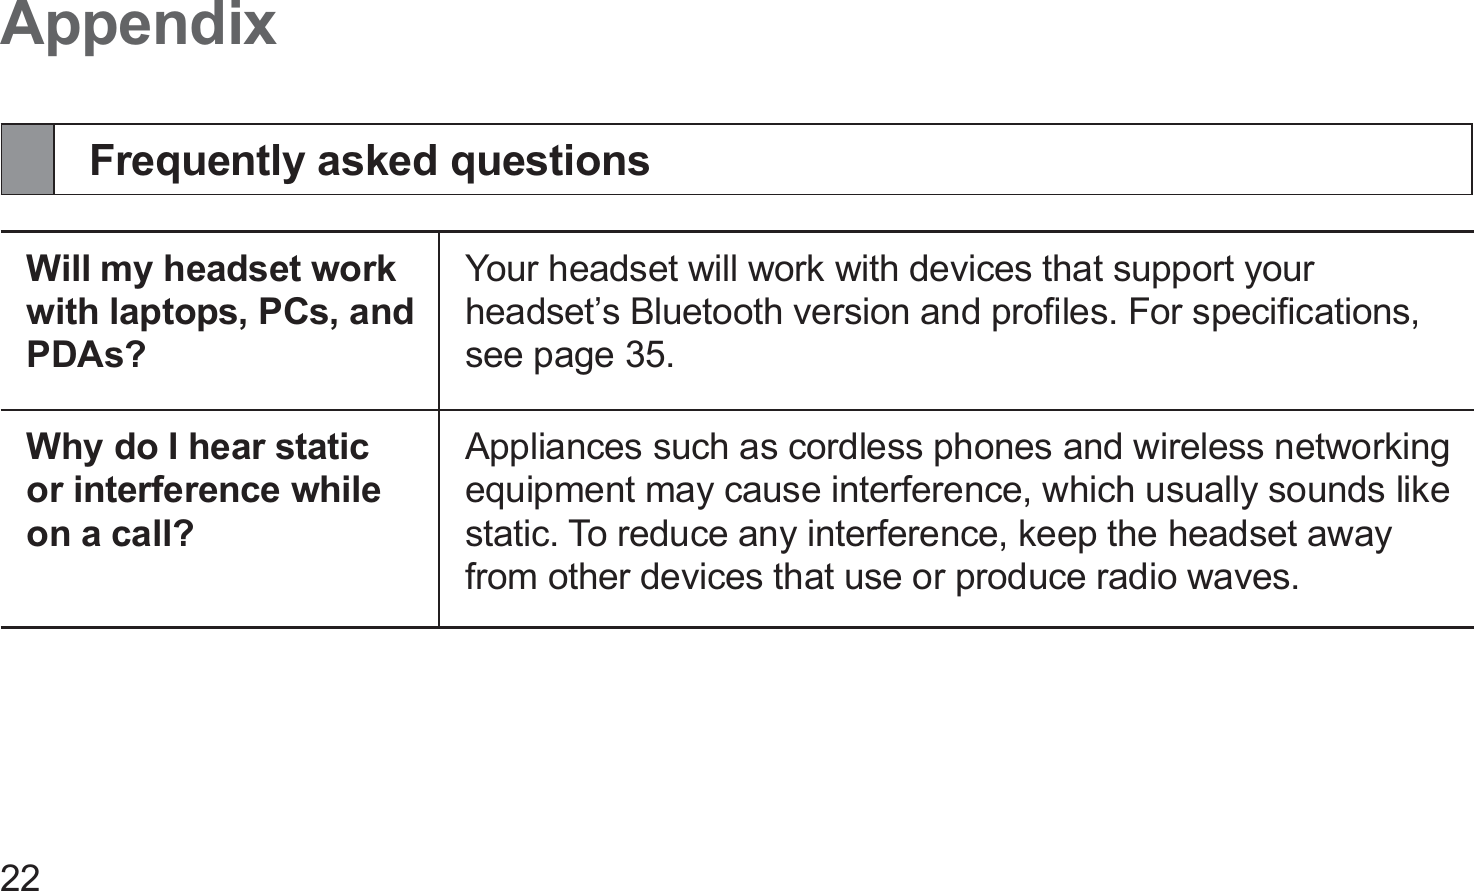 22AppendixFrequently asked questionsWill my headset work with laptops, PCs, and PDAs?Your headset will work with devices that support your headset’s Bluetooth version and proﬁles. For speciﬁcations, see page 35.Why do I hear static or interference while on a call?Appliances such as cordless phones and wireless networking equipment may cause interference, which usually sounds like static. To reduce any interference, keep the headset away from other devices that use or produce radio waves.